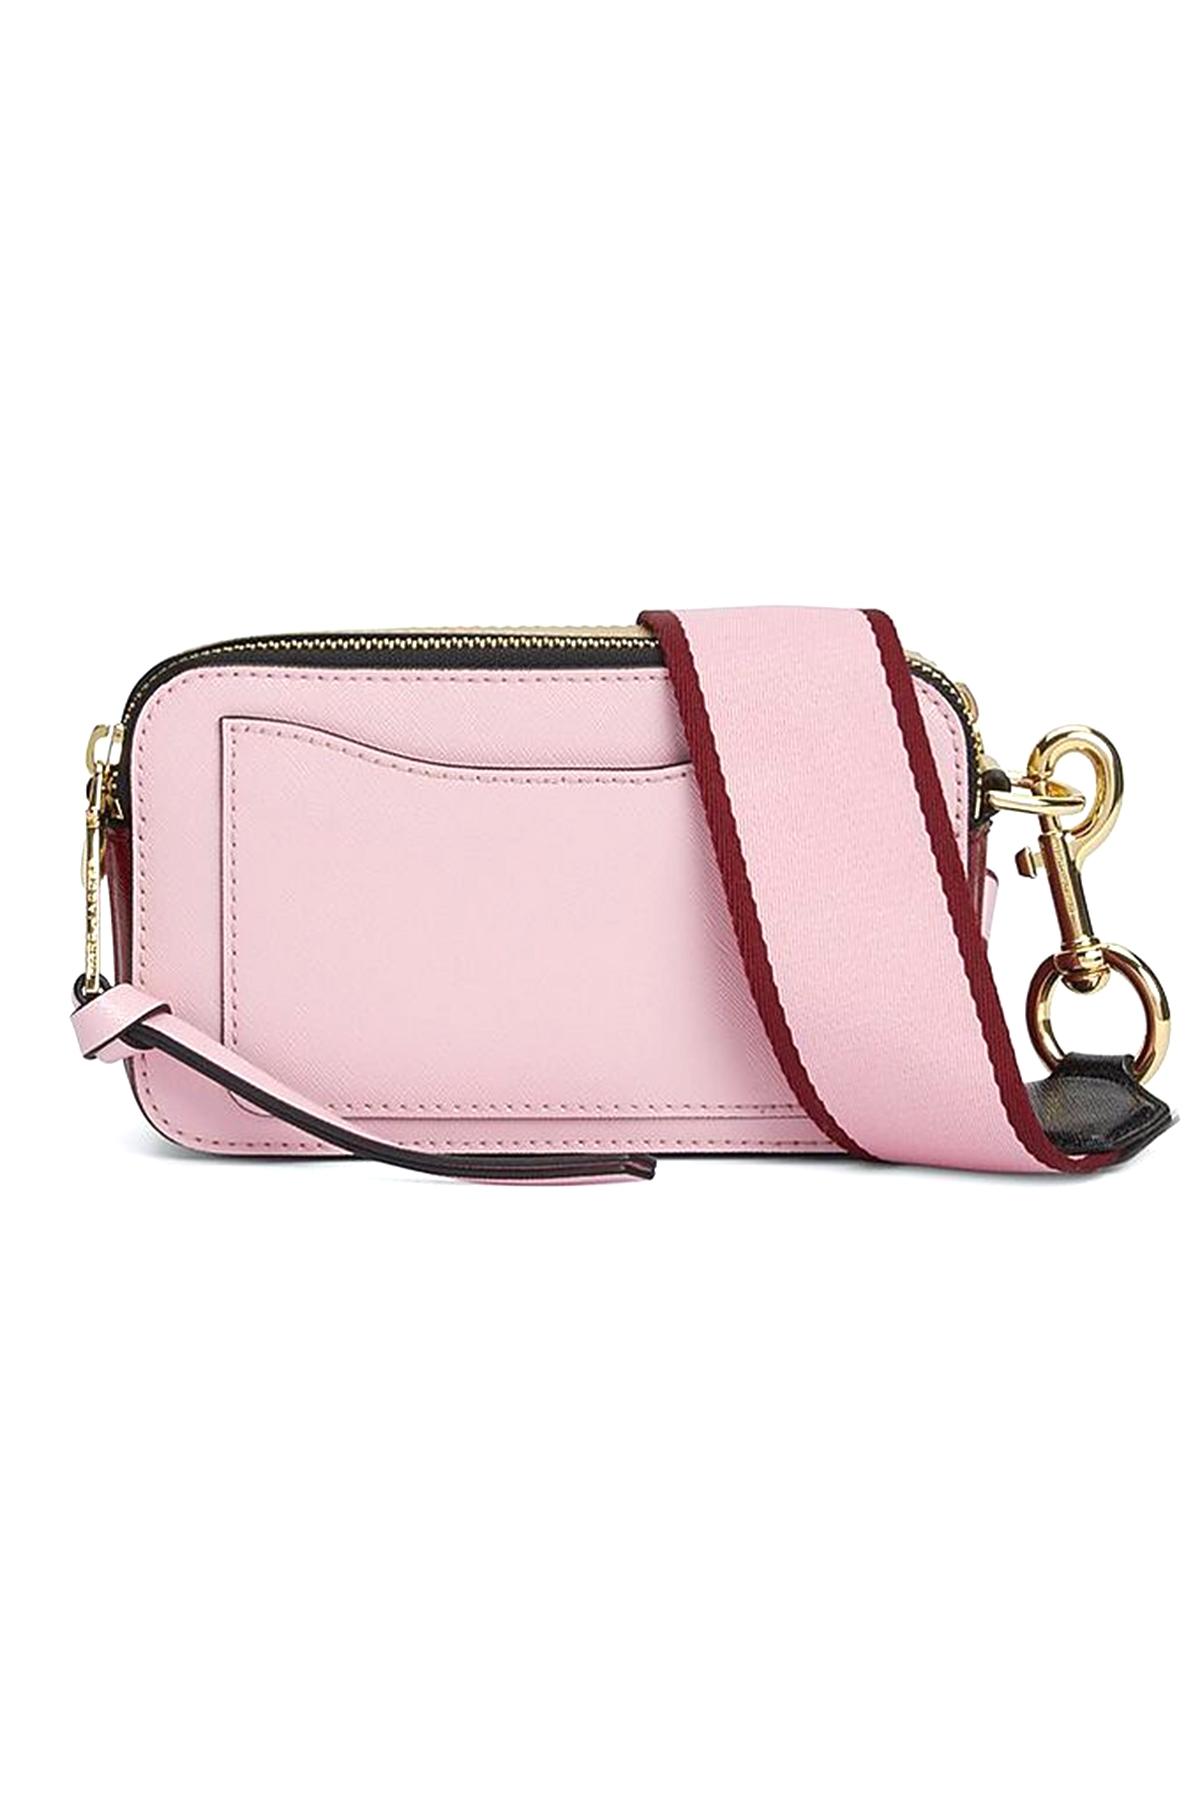 Marc Jacobs Leather Snapshot Bag In Baby Pink/red - Lyst